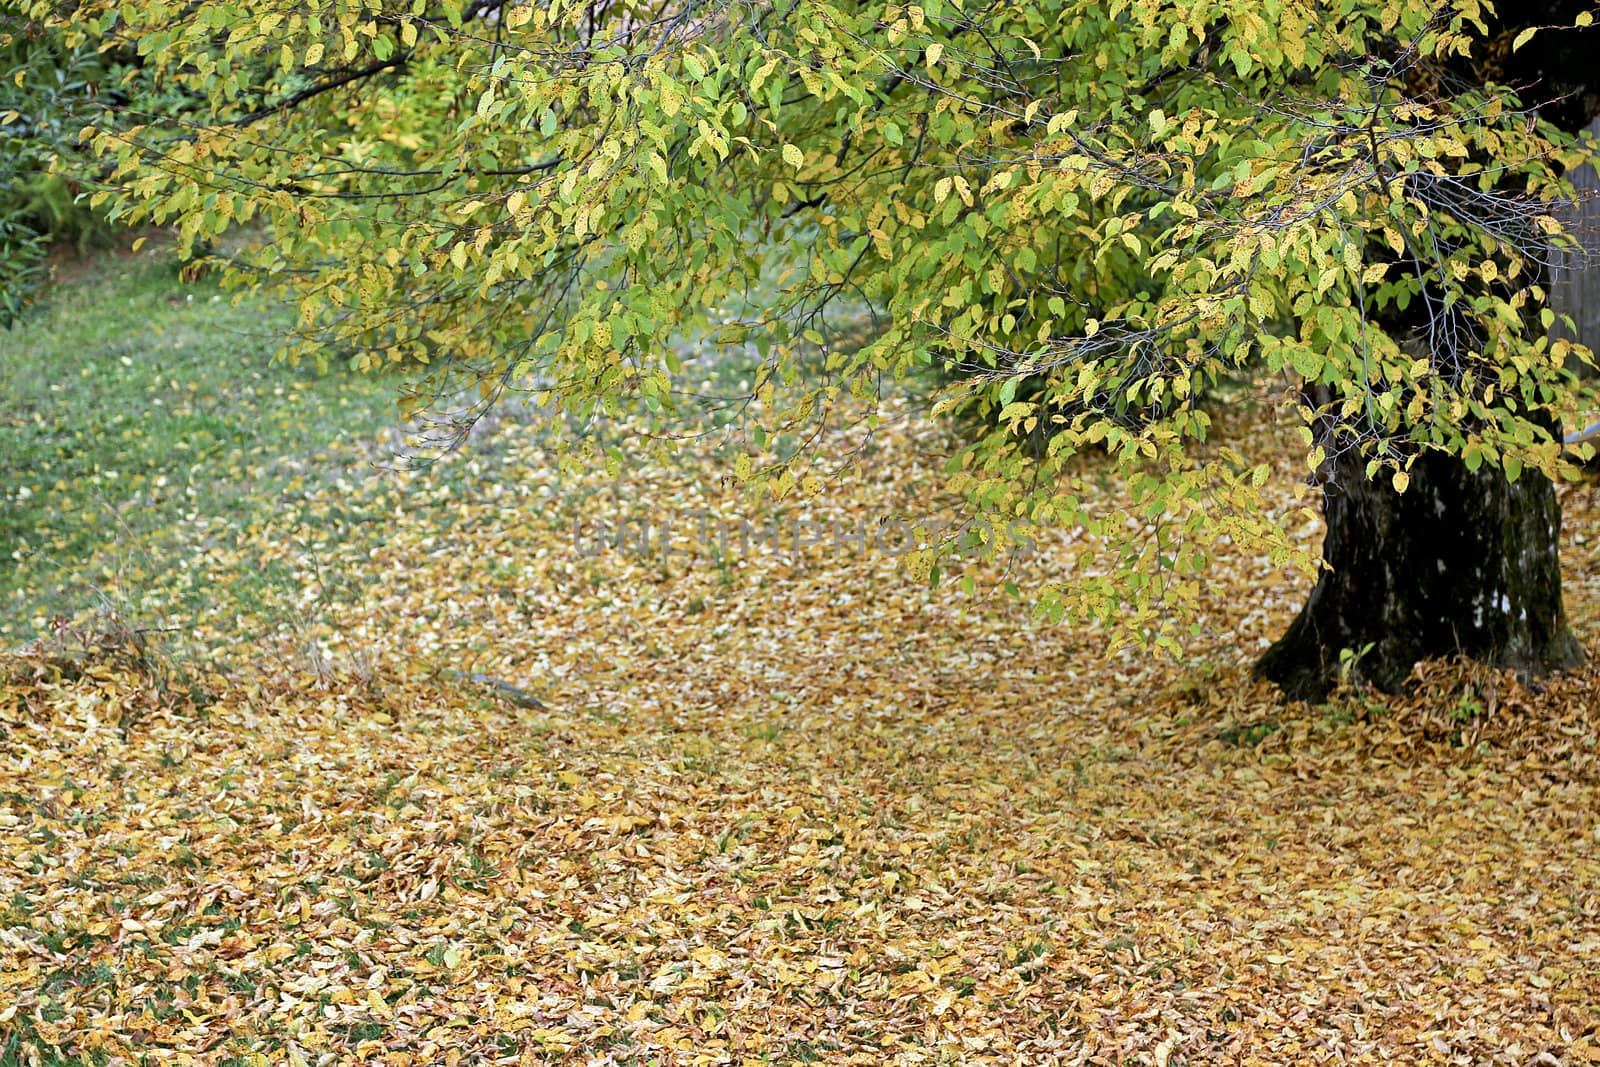 A big autumn tree with fallen leaves